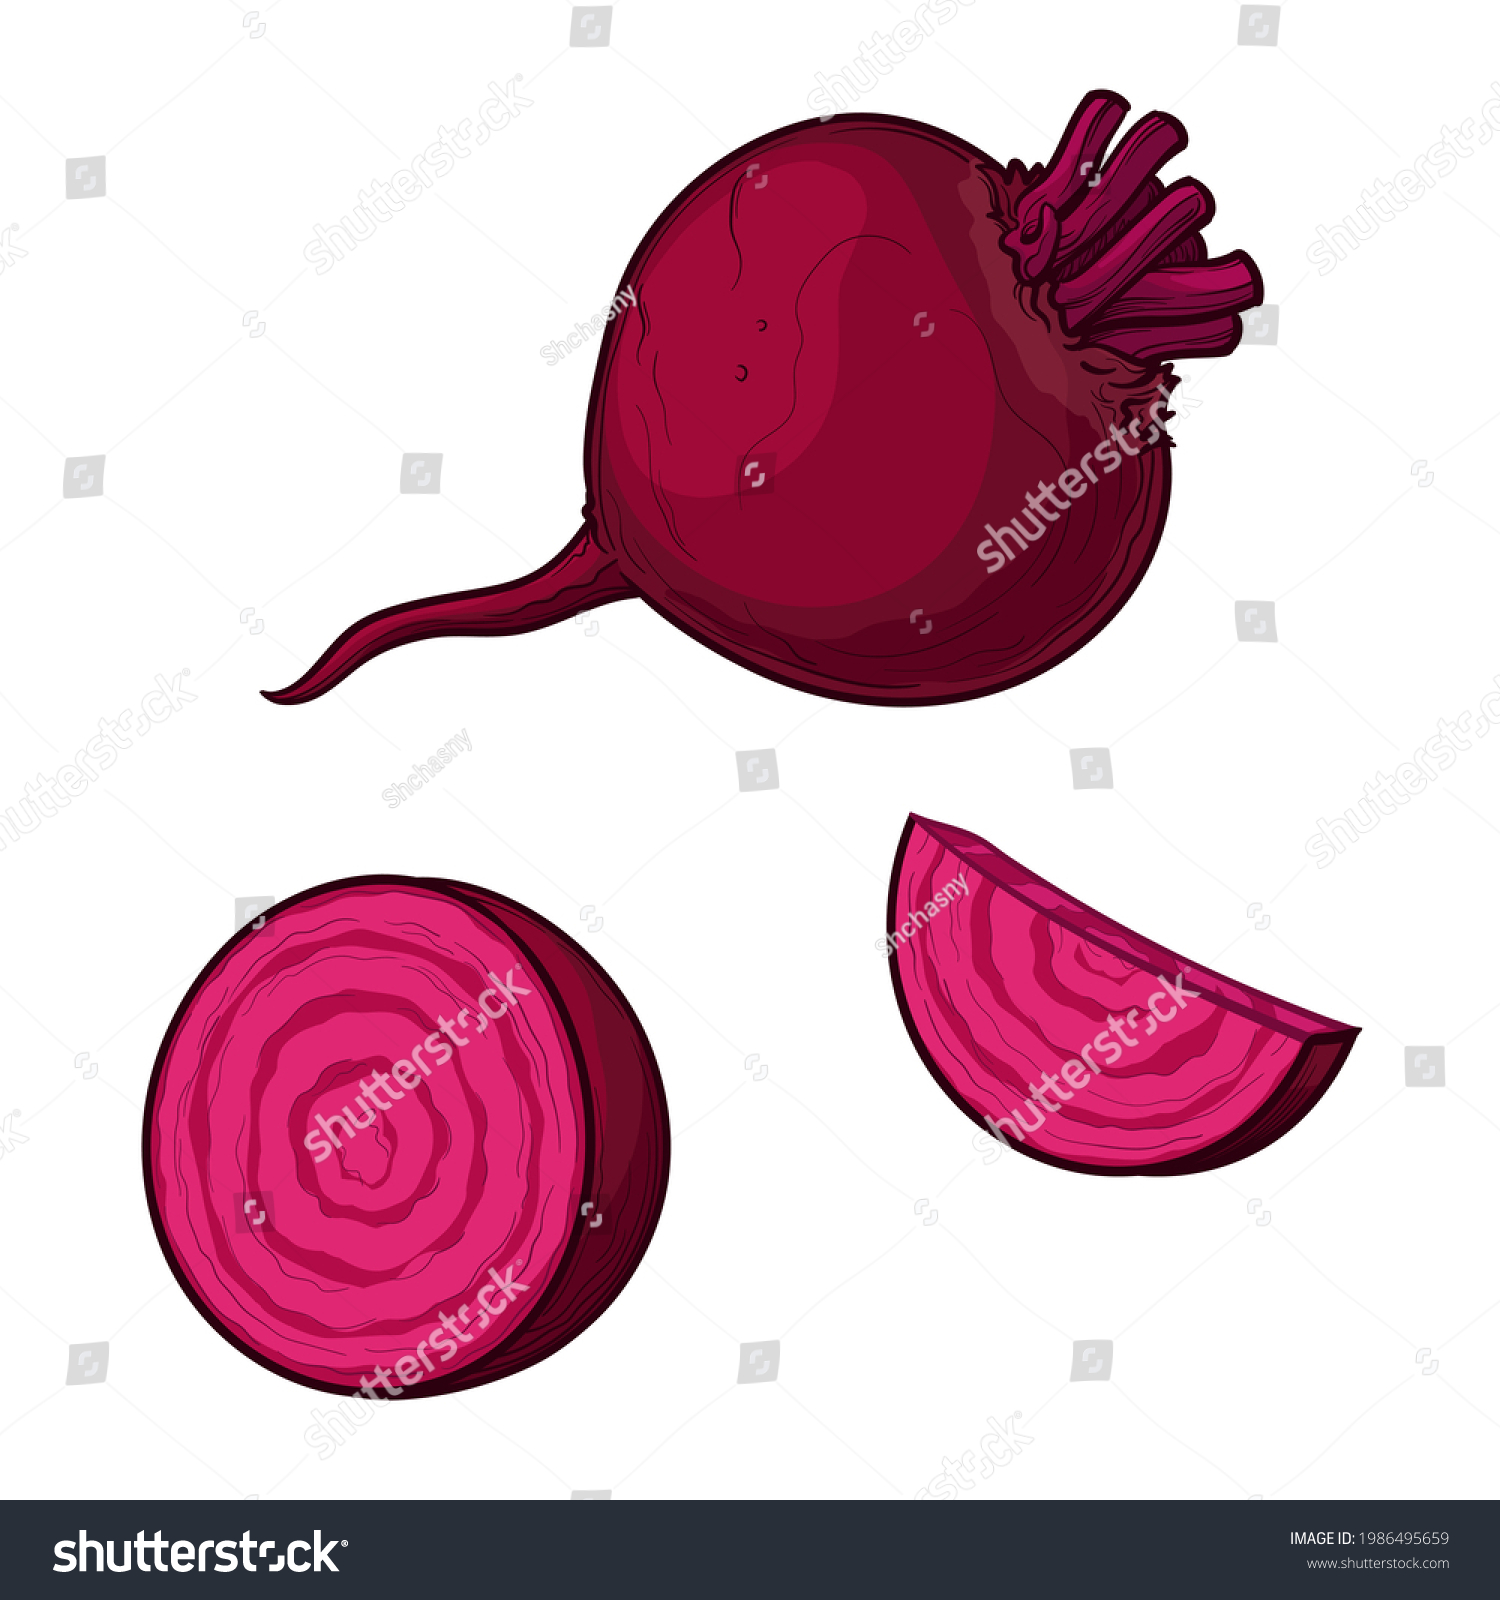 Vector beets isolated on a white background. Red beetroot whole, cut, slice. Set of beets. #1986495659